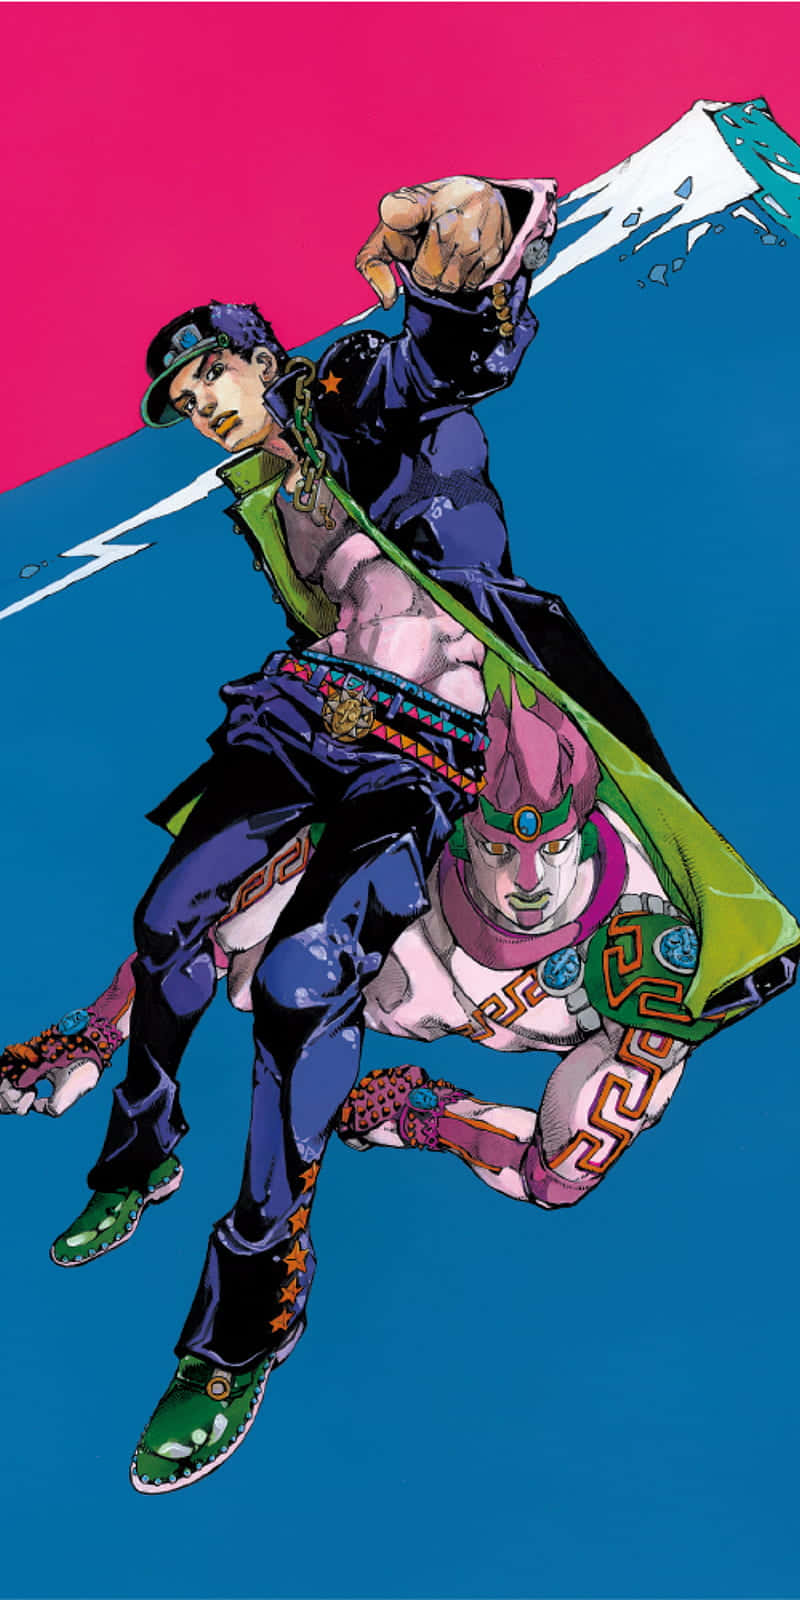 Download The Iconic Jojo Pose Showcased in This Eye-Catching